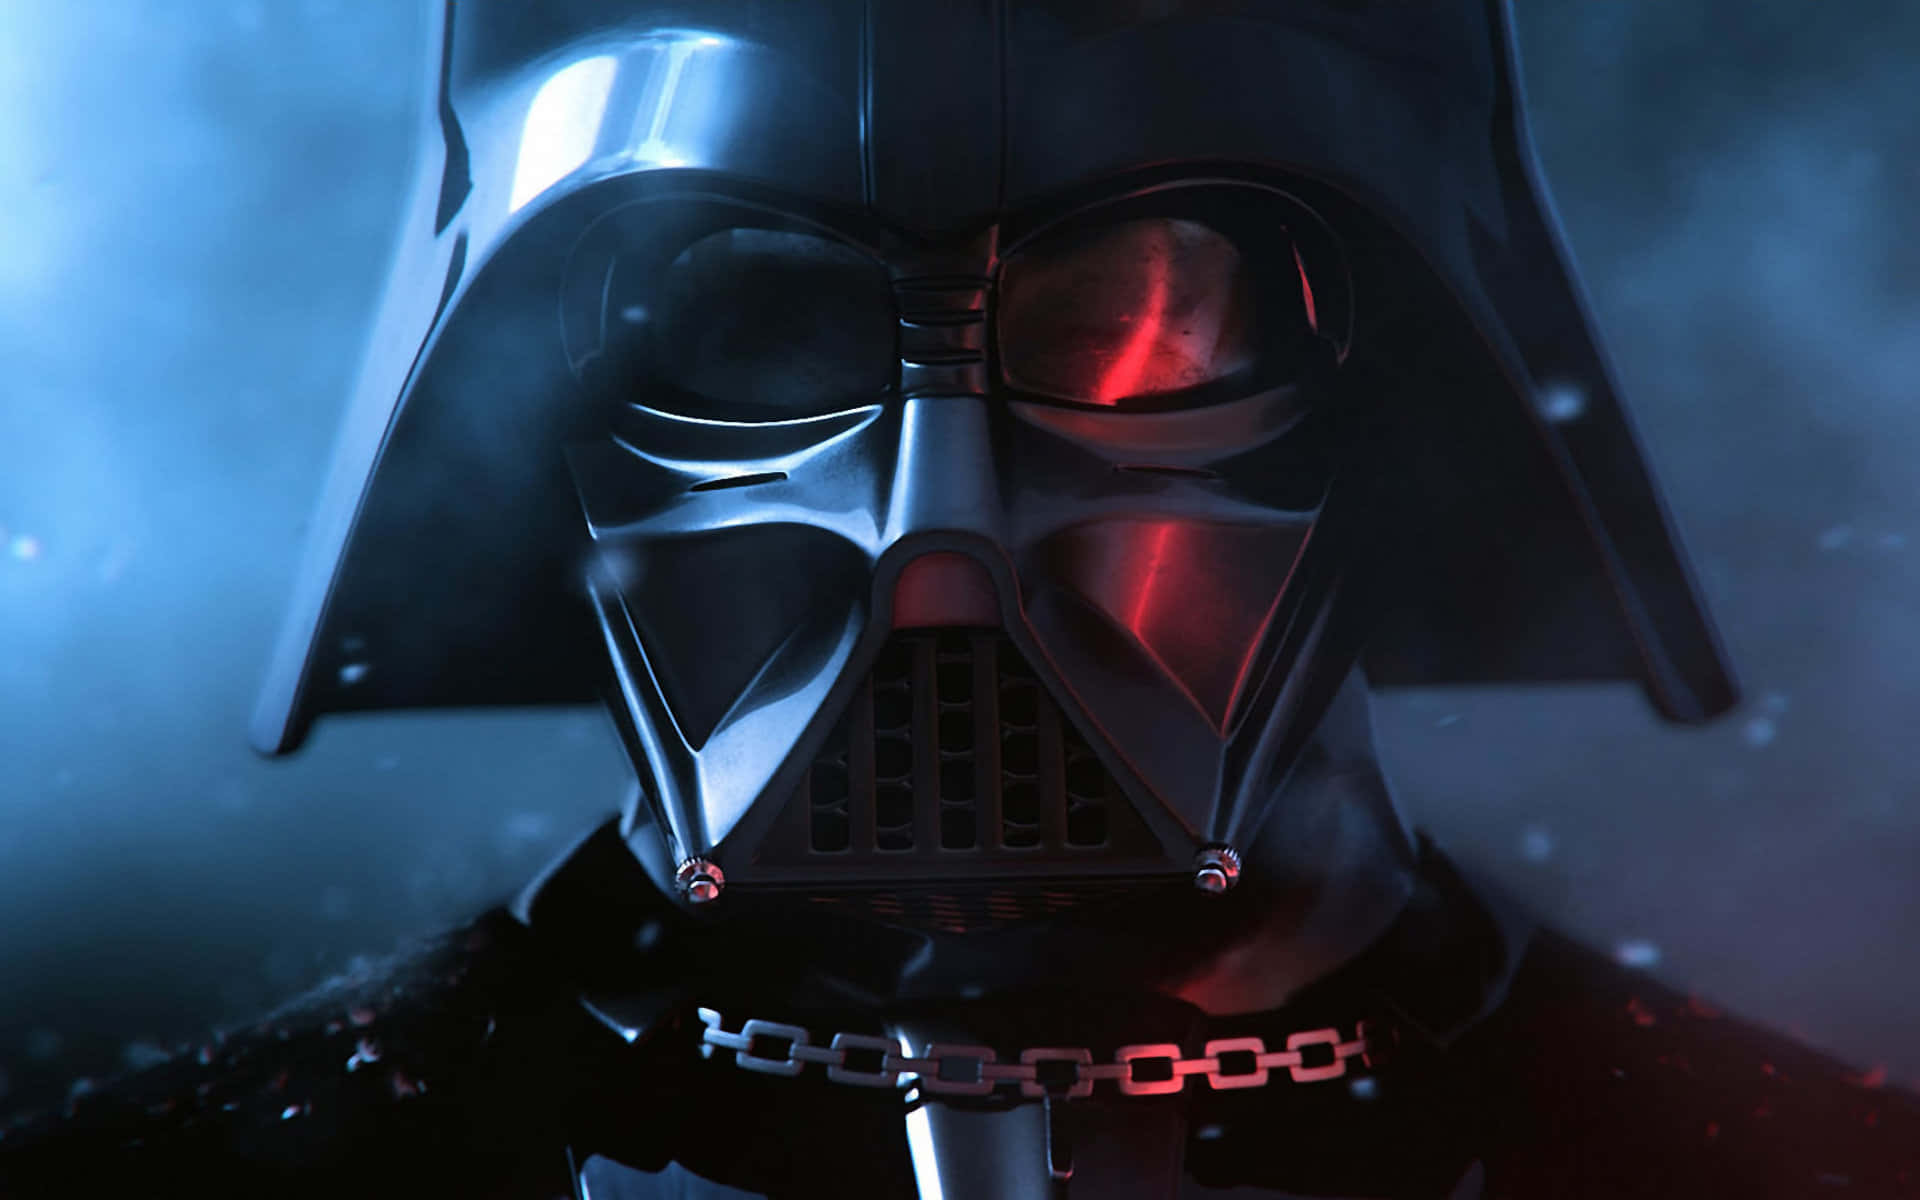 Darth Vader, a powerful Sith Lord from the Star Wars universe